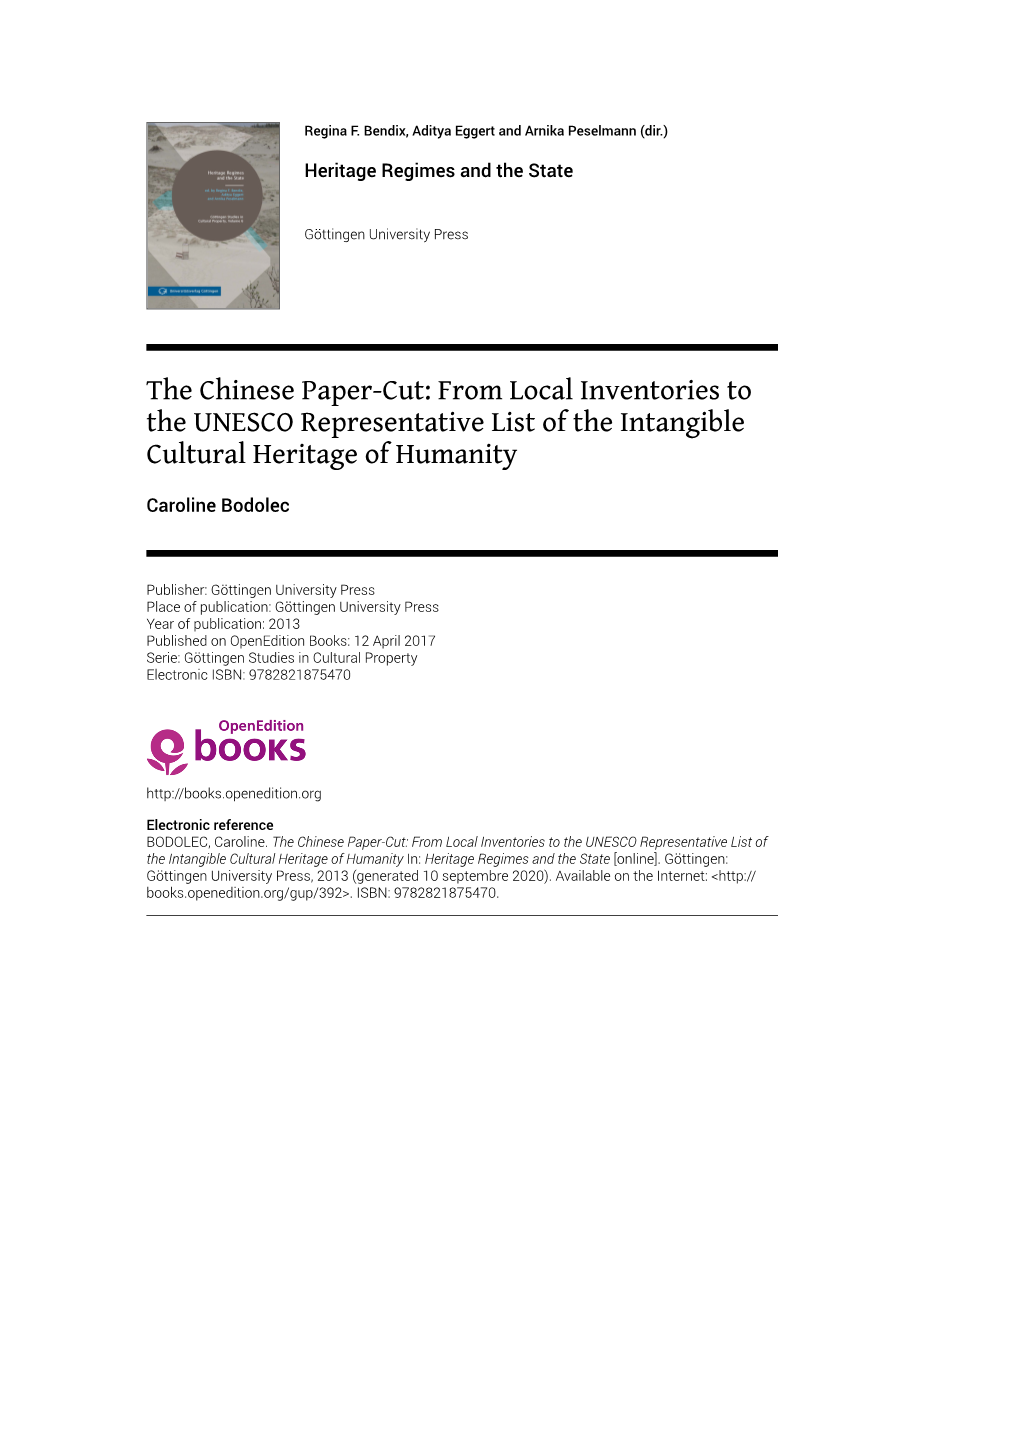 The Chinese Paper-Cut: from Local Inventories to the UNESCO Representative List of the Intangible Cultural Heritage of Humanity